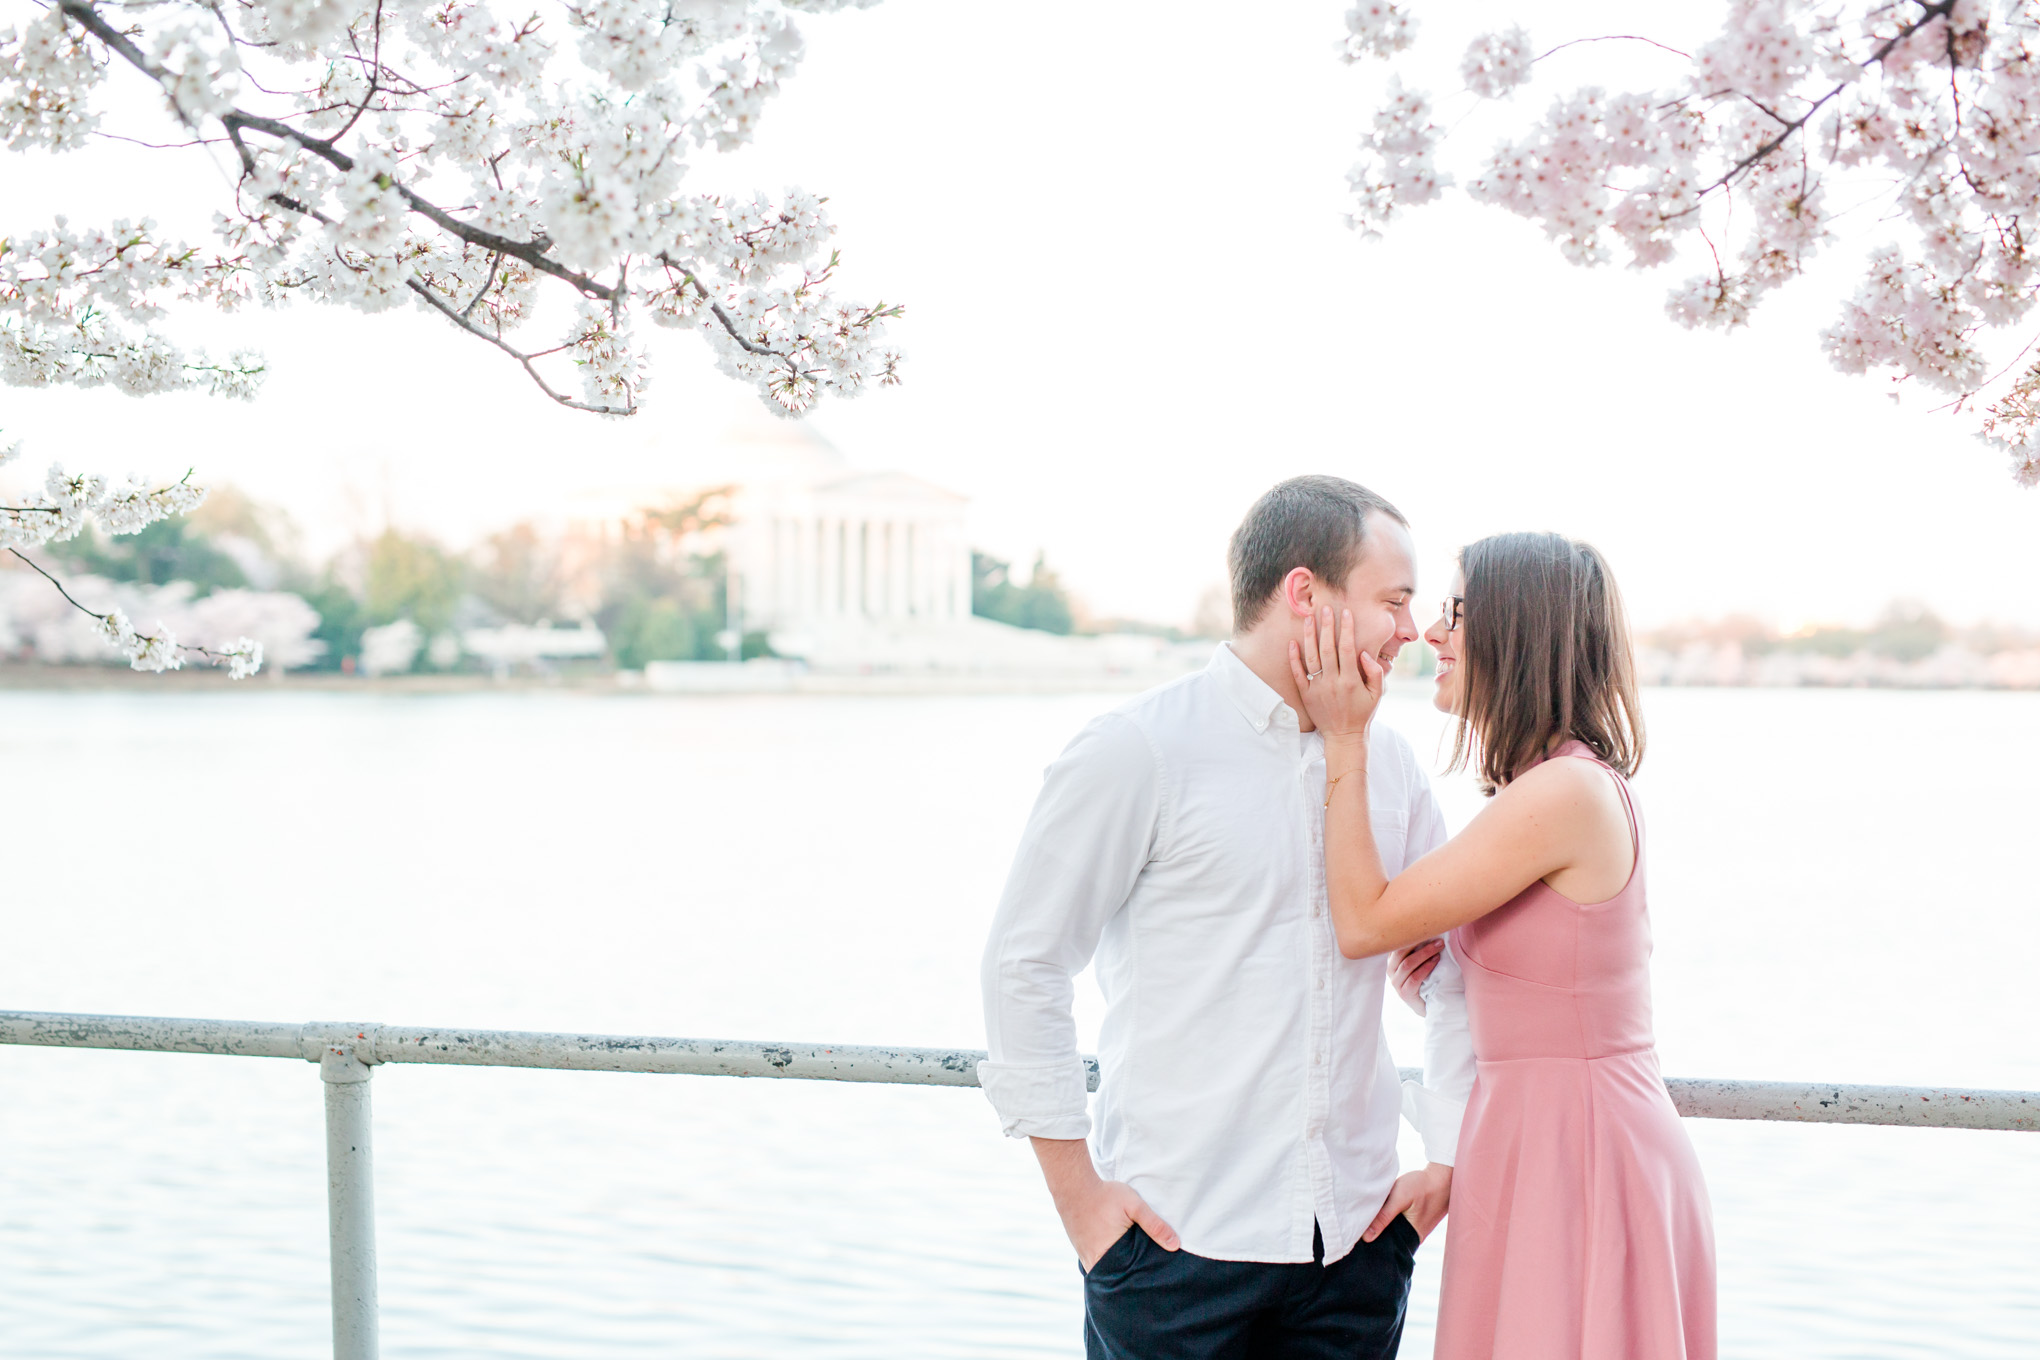 sunny cherry blossoms engagement session, Washington, D.C. engagement photos, Washington D.C. engagement photos, sunrrise engagement photos, cherry blossom engagement photos, D.C. cherry bloossoms, D.C. cherry blossoms photos, cherry blossom photos, cherry blossoms portrraits, sunny engagement photos, classic engagement photos, Rachel E.H. Photography, engagement session style, Jefferson Memorial